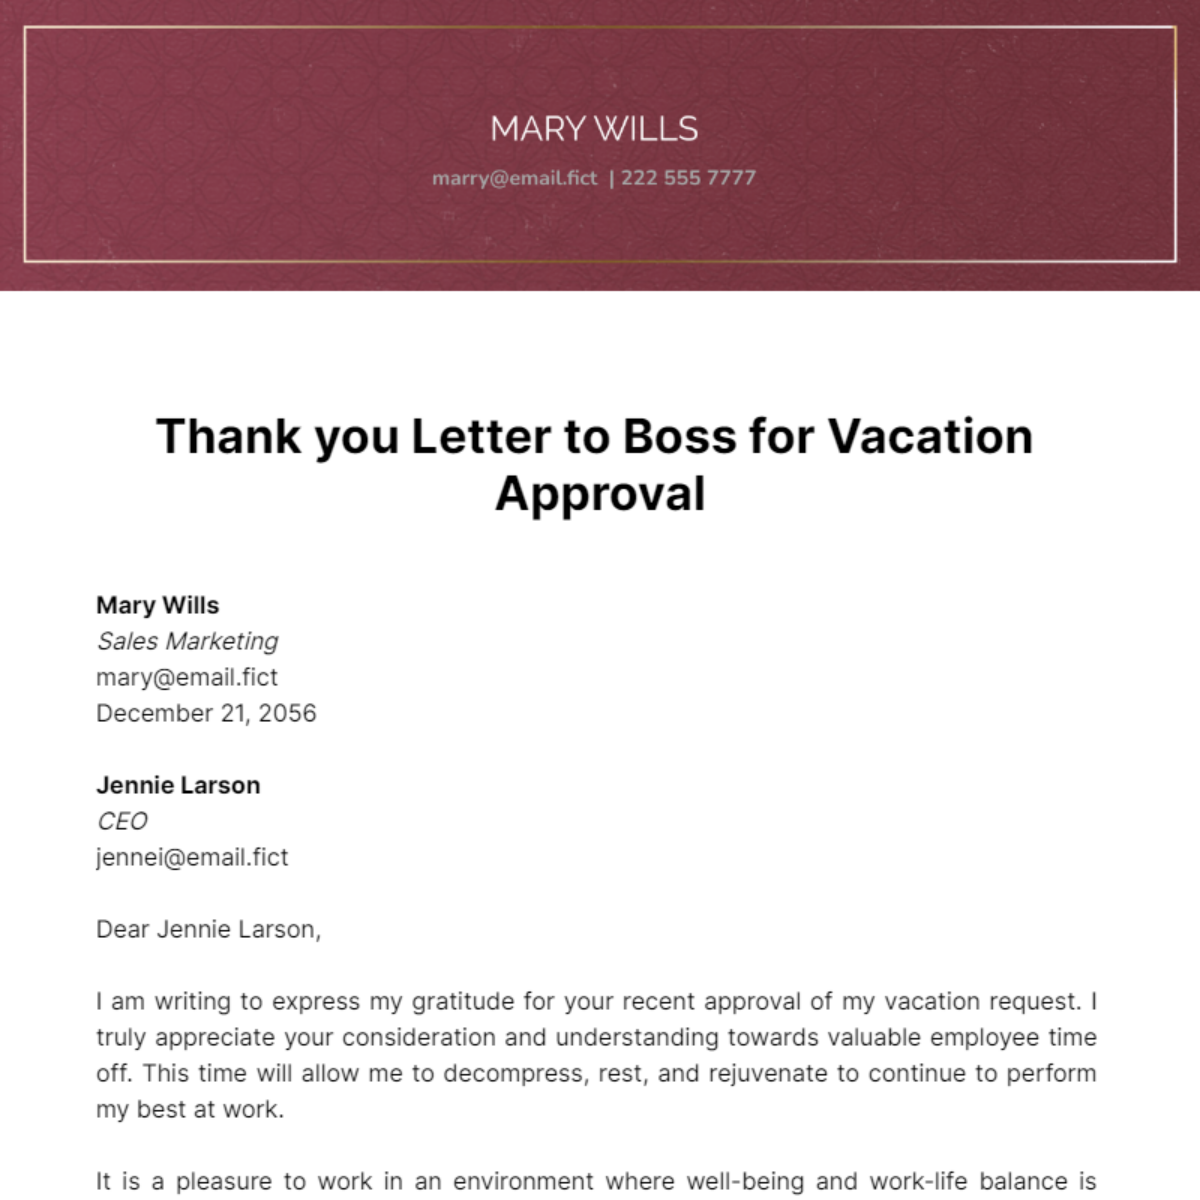 Thank you Letter to Boss for Vacation Approval Template